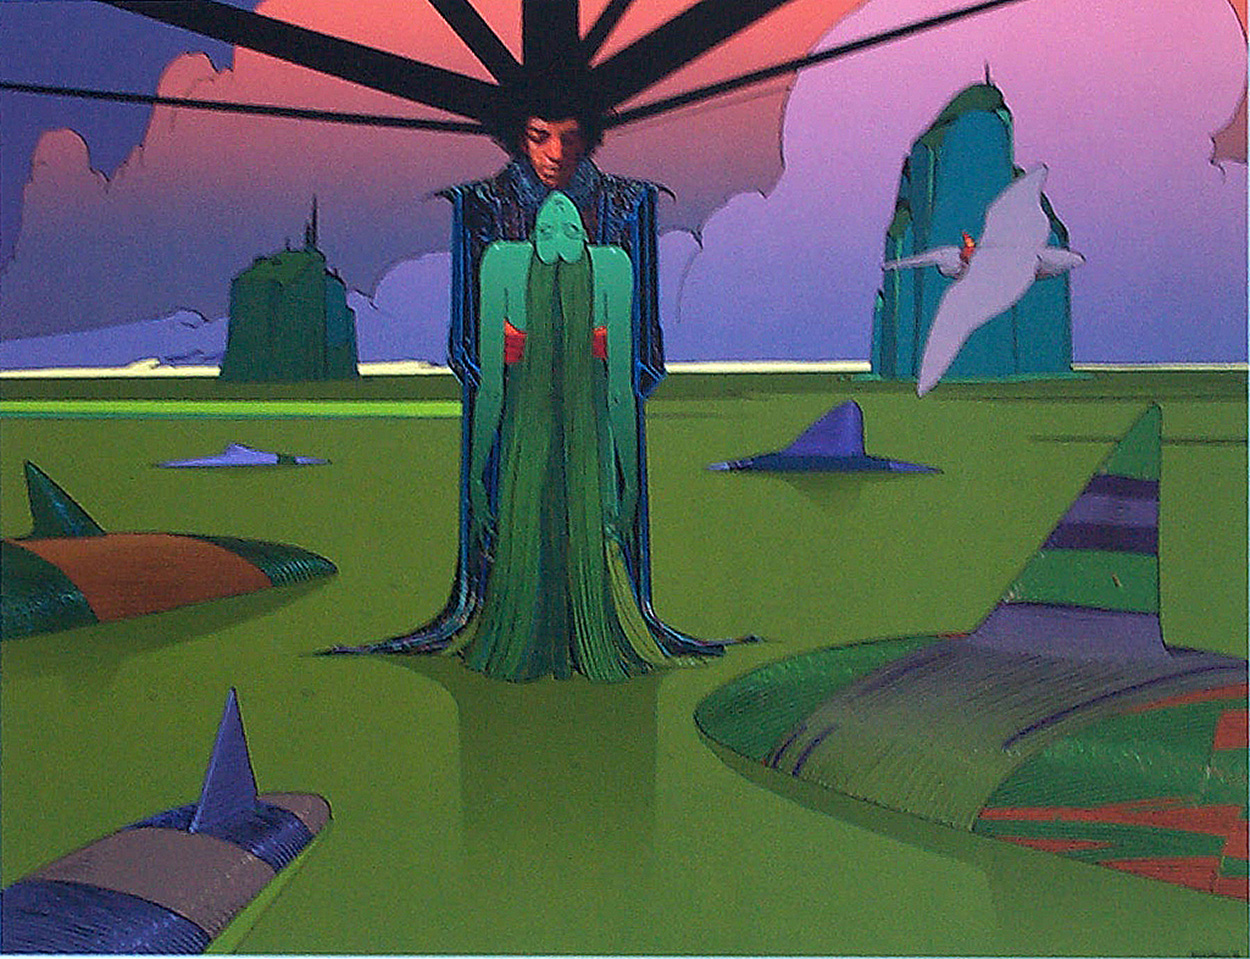 Hendrix - Electric Ladyland (Limited Edition Print) art by Moebius (Jean Giraud) Art at The Illustration Art Gallery